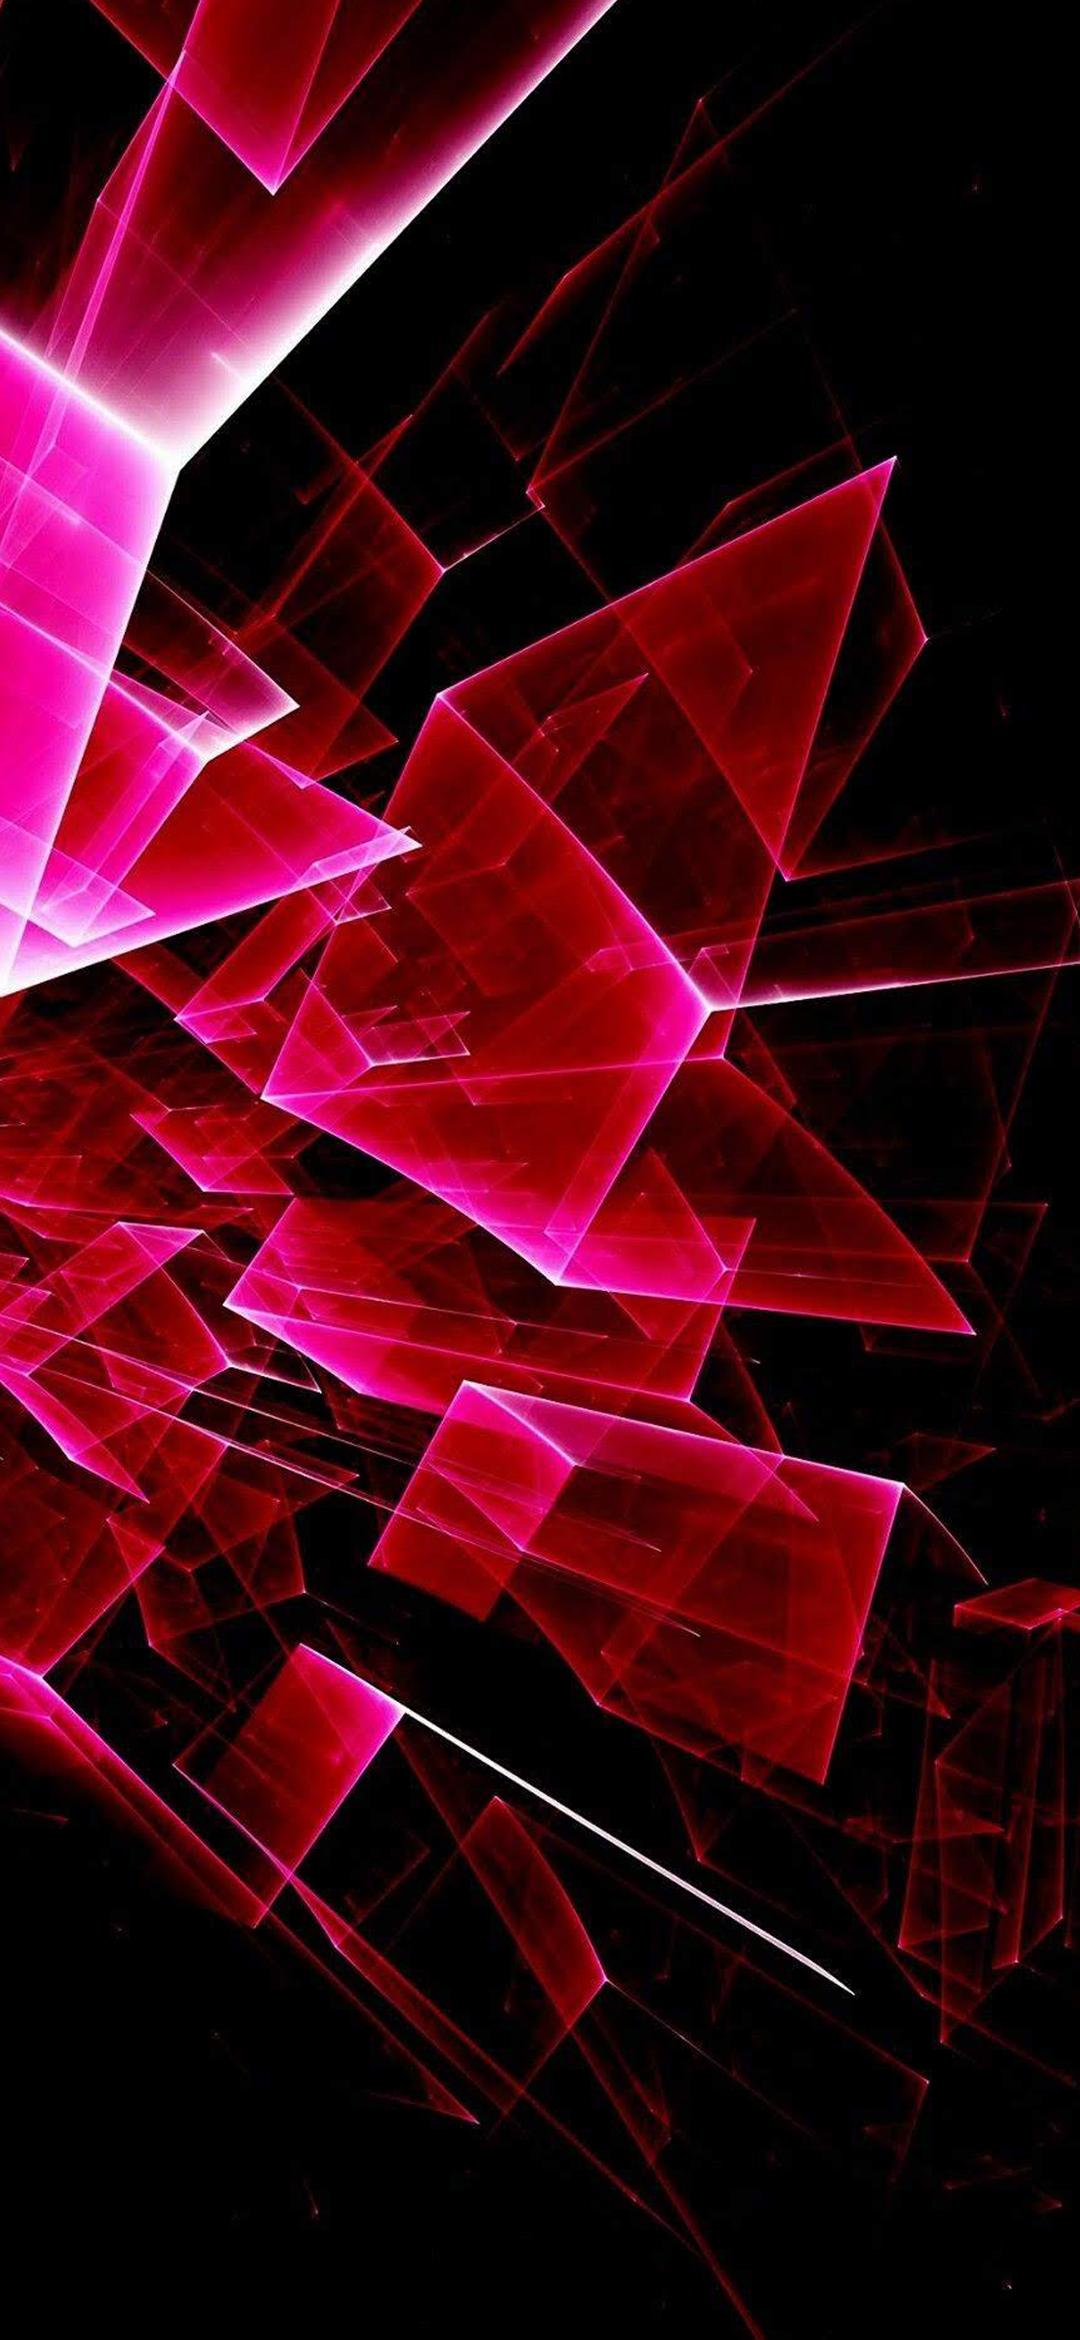 1080 x 2340 · jpeg - Best 10 Wallpapers for Huawei Honor 10 Lite #08 - Red 3D Lights - HD ...